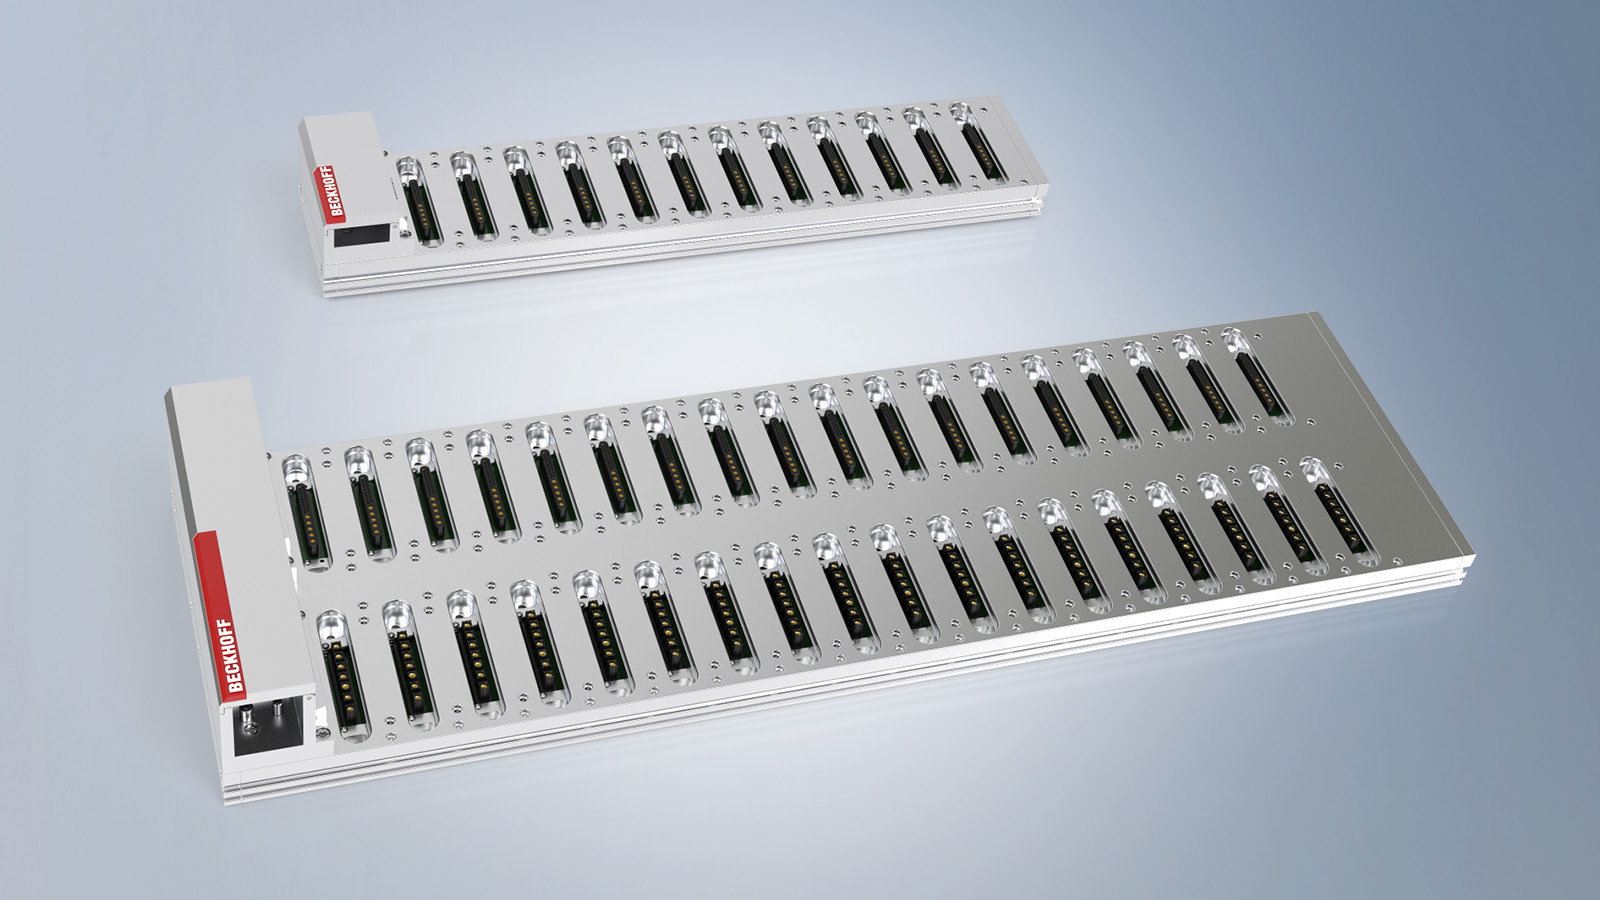 Different baseplates – with data connectors or with data and power connectors – can be used to suit specific applications. 